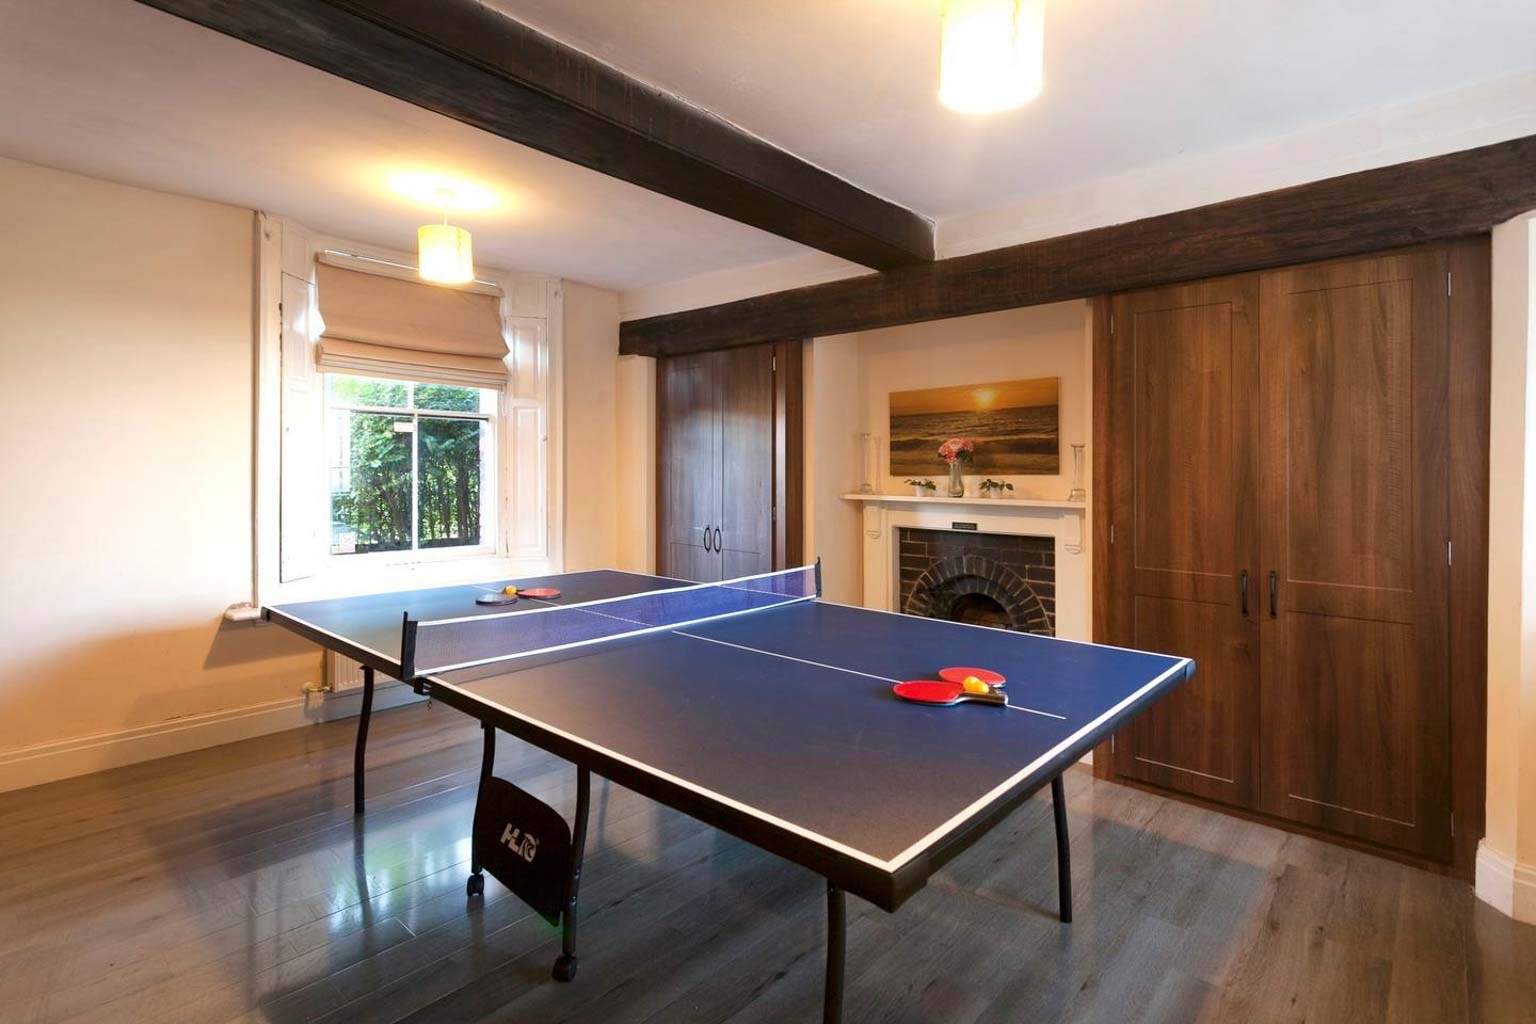 Party houses with games rooms